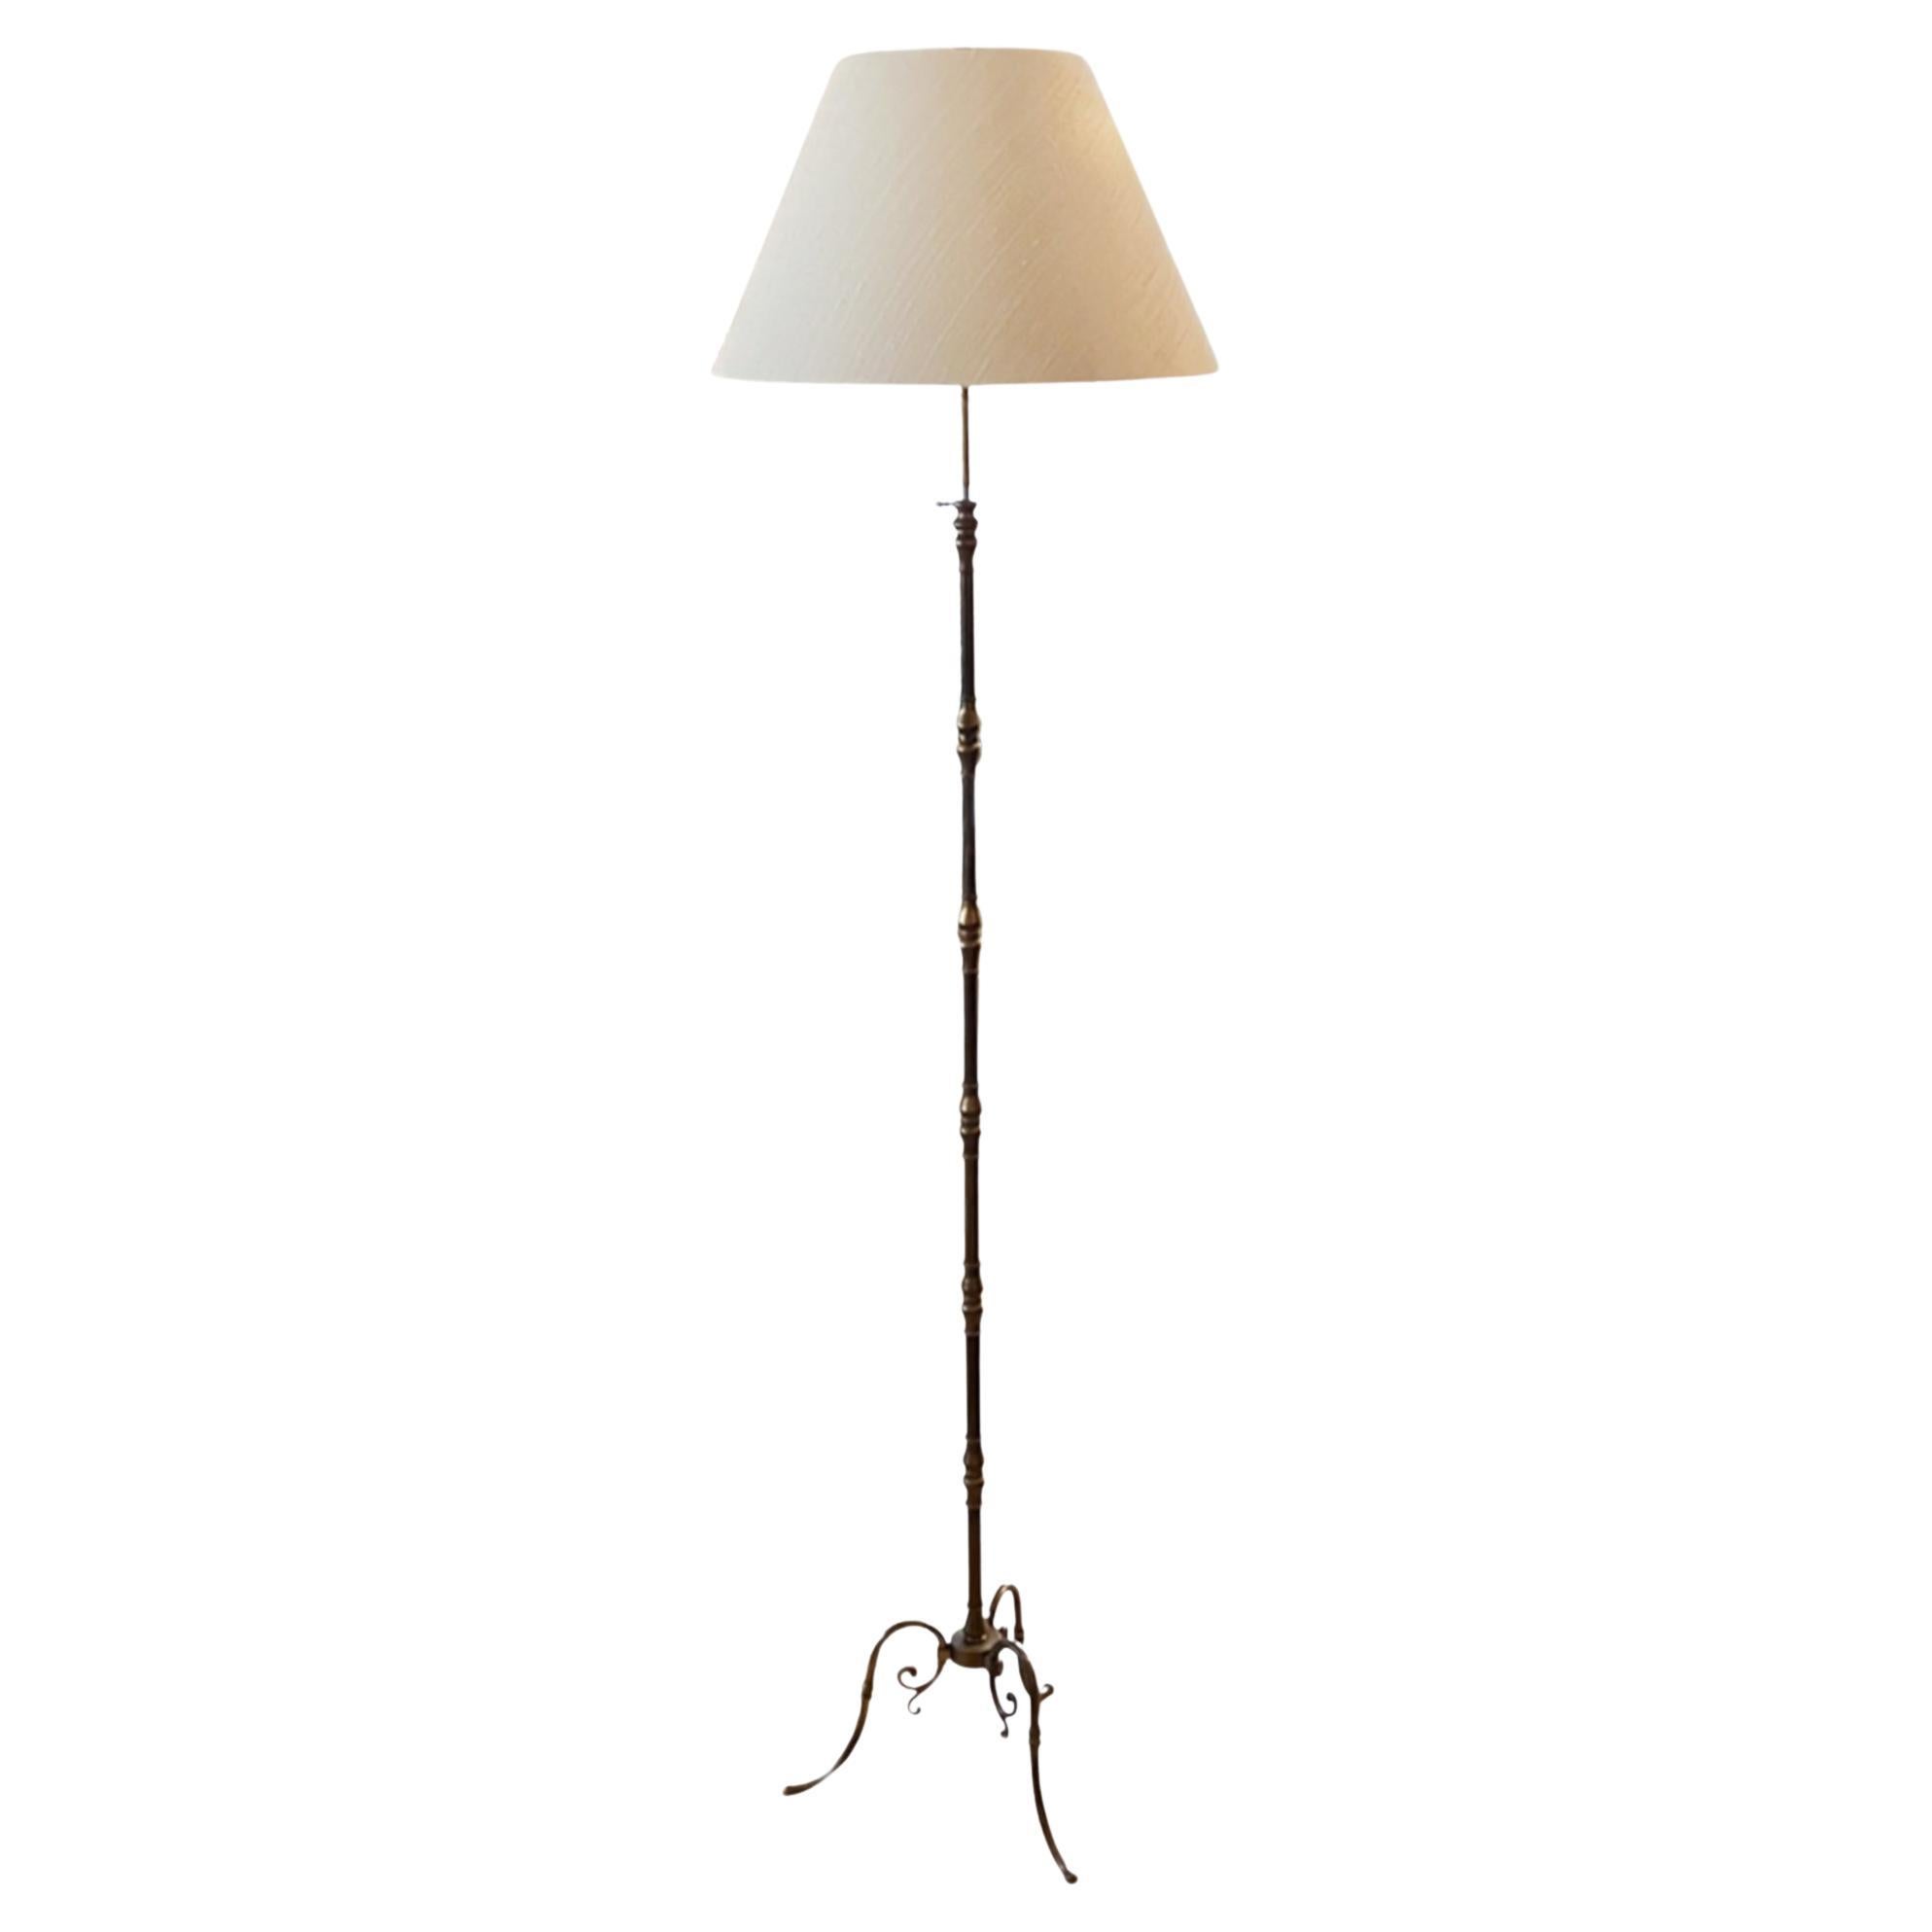 Decorative French Midcentury Brass Floor Lamp For Sale